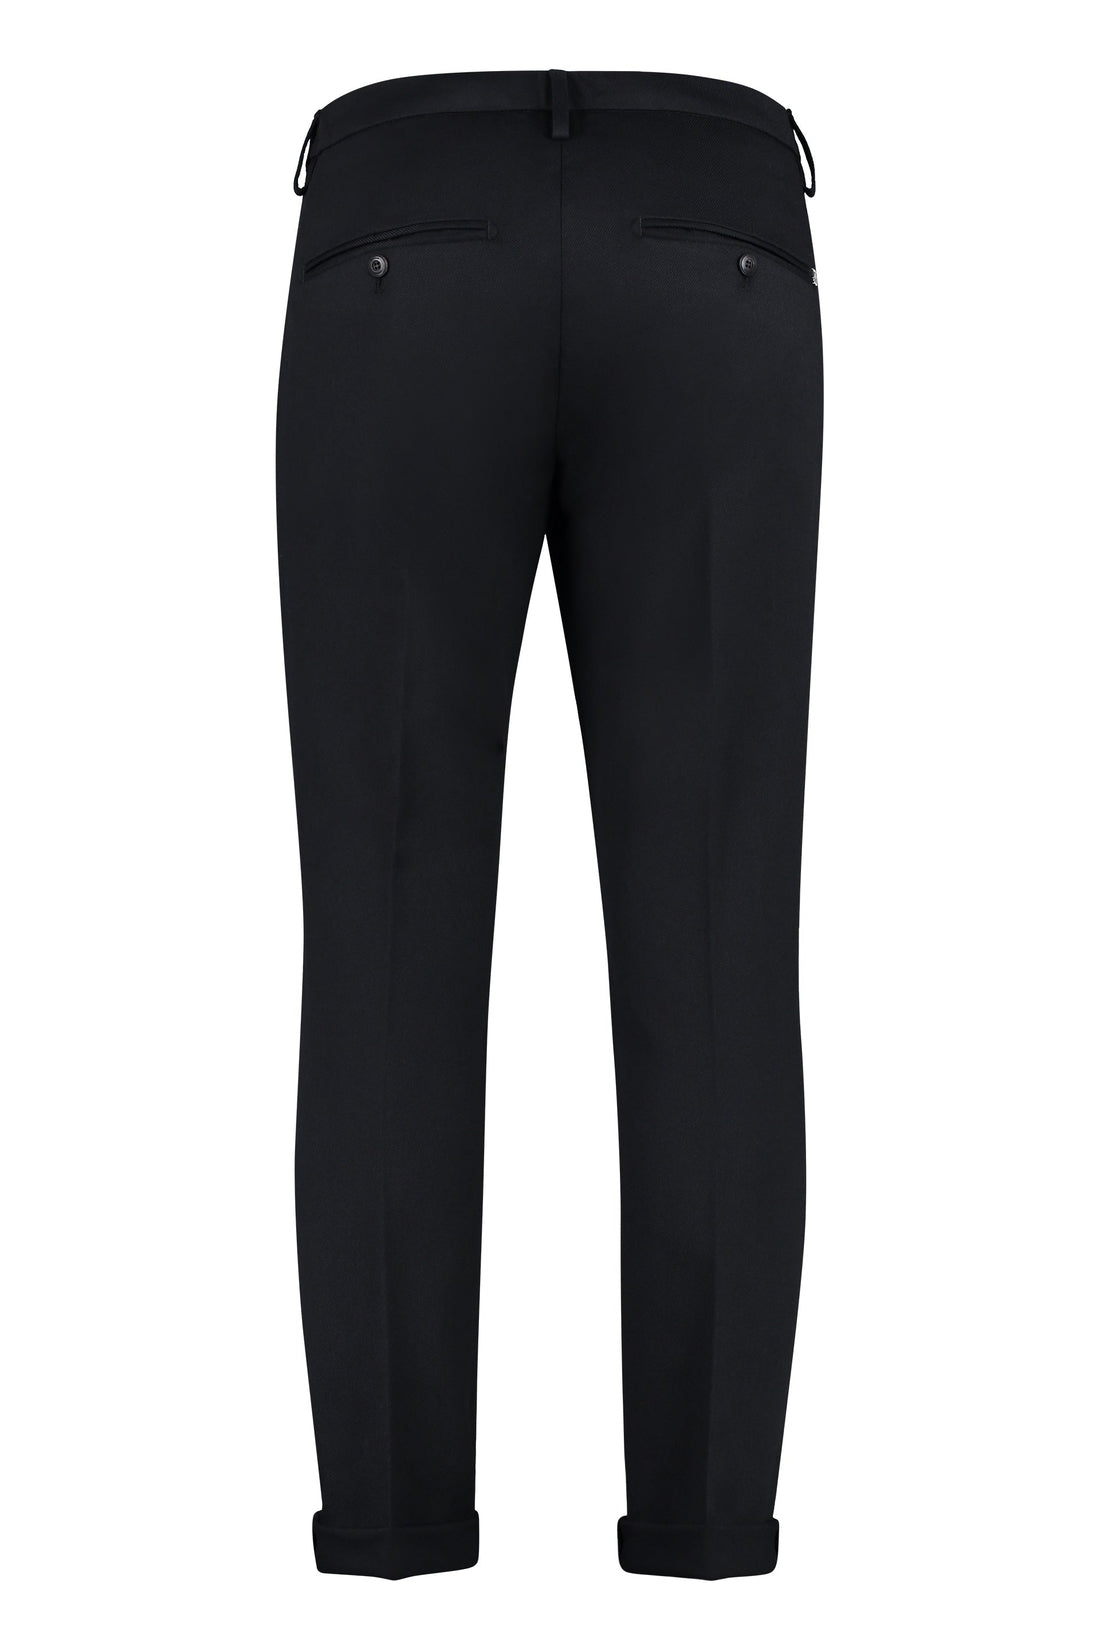 Dondup-OUTLET-SALE-Gaubert wool and cotton trousers-ARCHIVIST